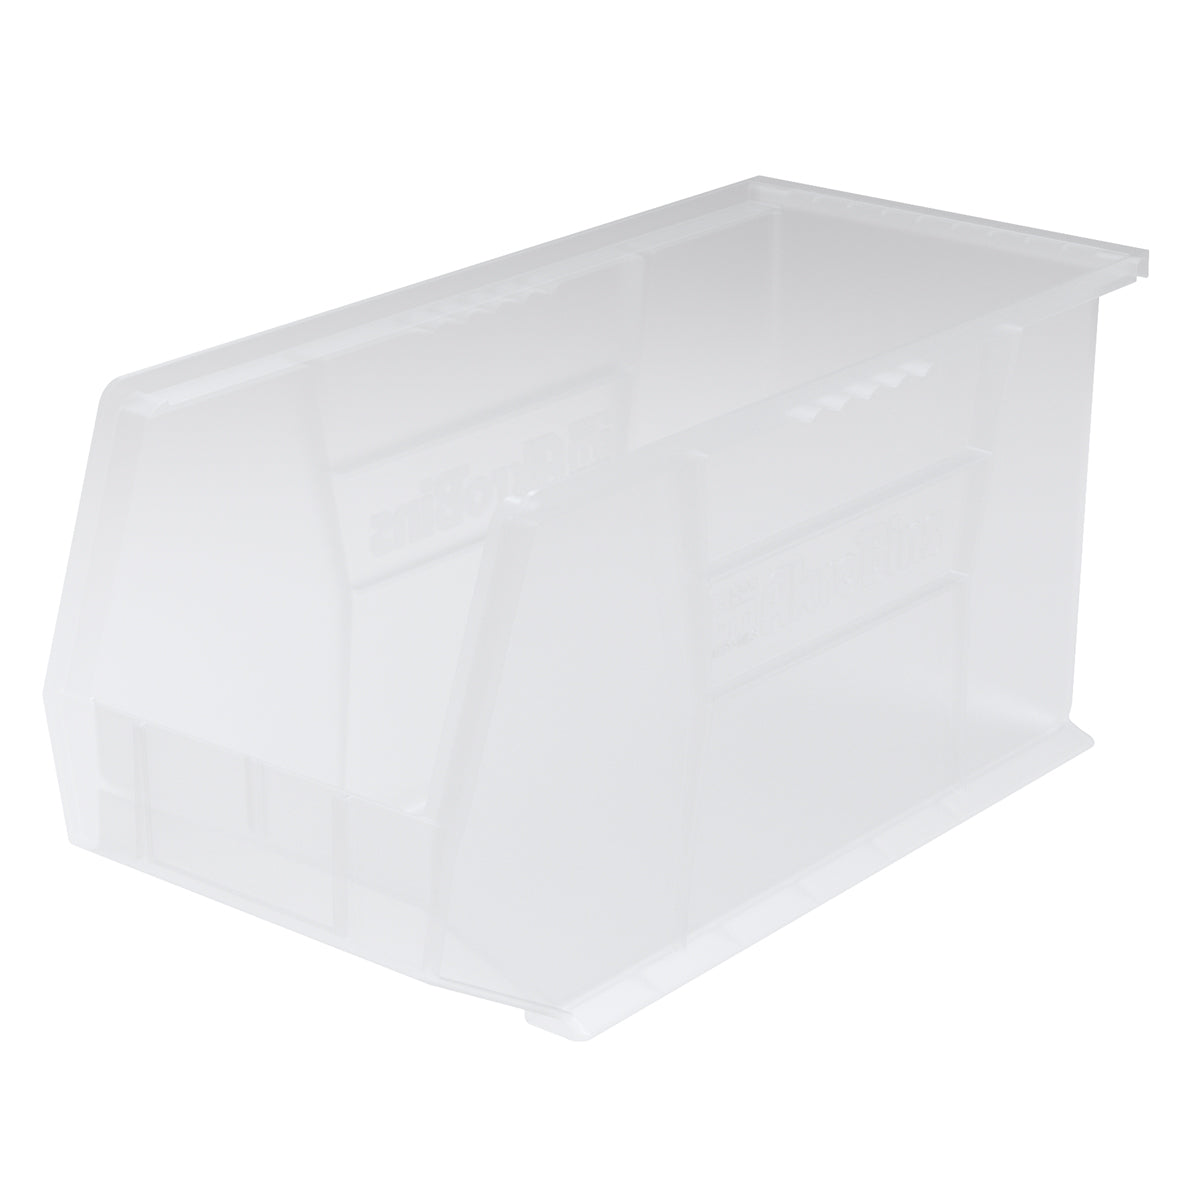 Akro-Mils (6 Pack) 30265 Plastic Stackable Storage AkroBin Hanging Container